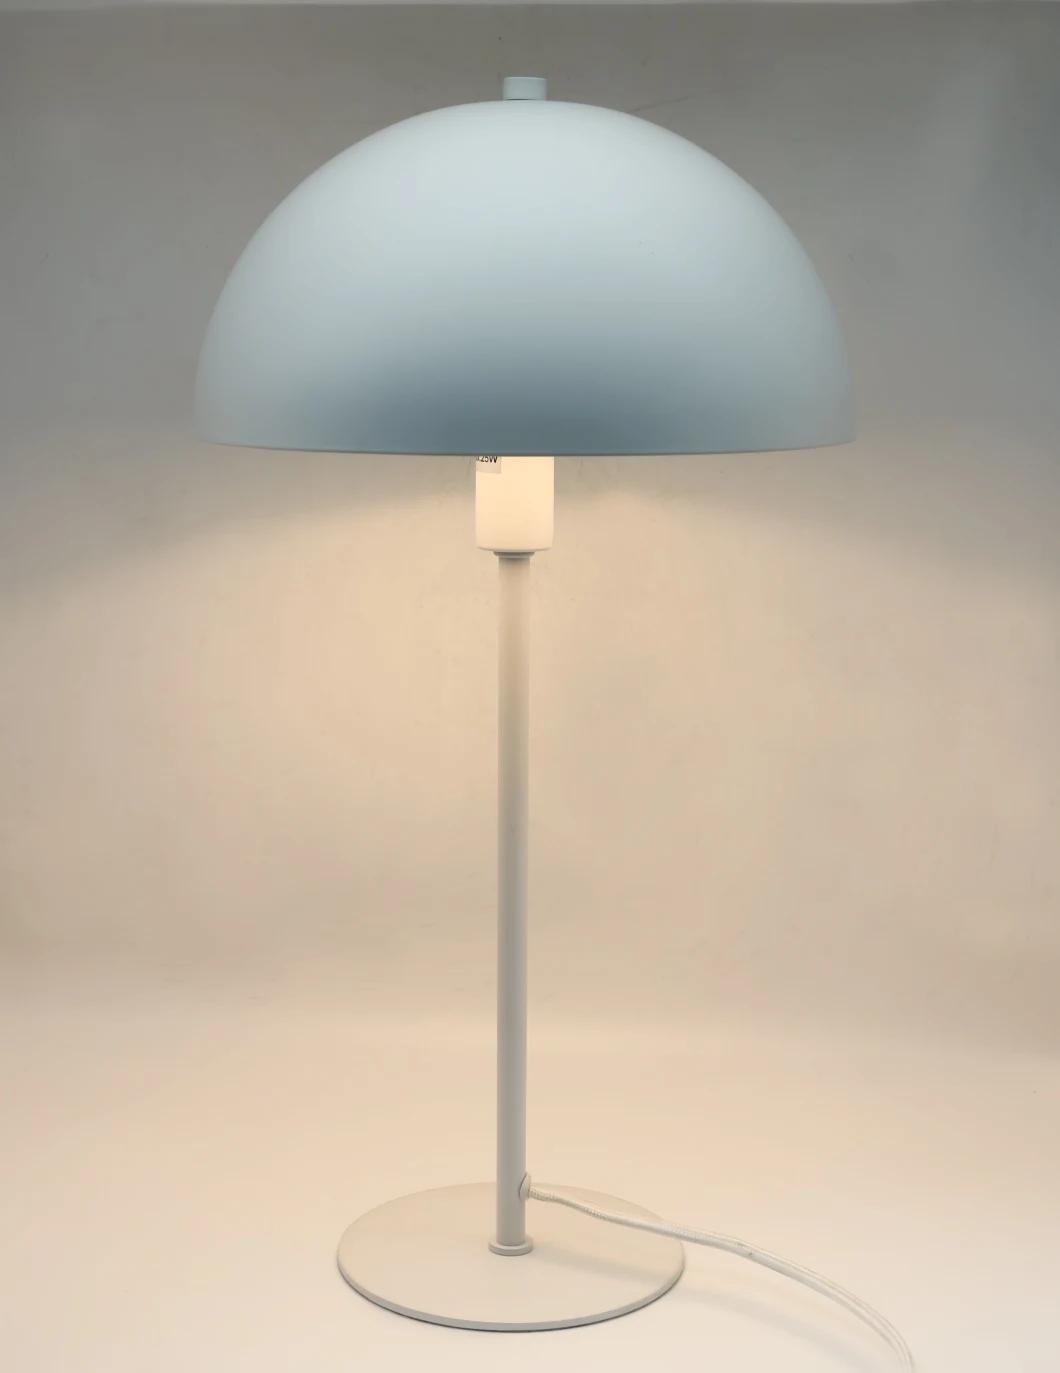 European Style Marbling LED Table Lamp Bedroom LED Marble Desk Lamp with Fabric Shape